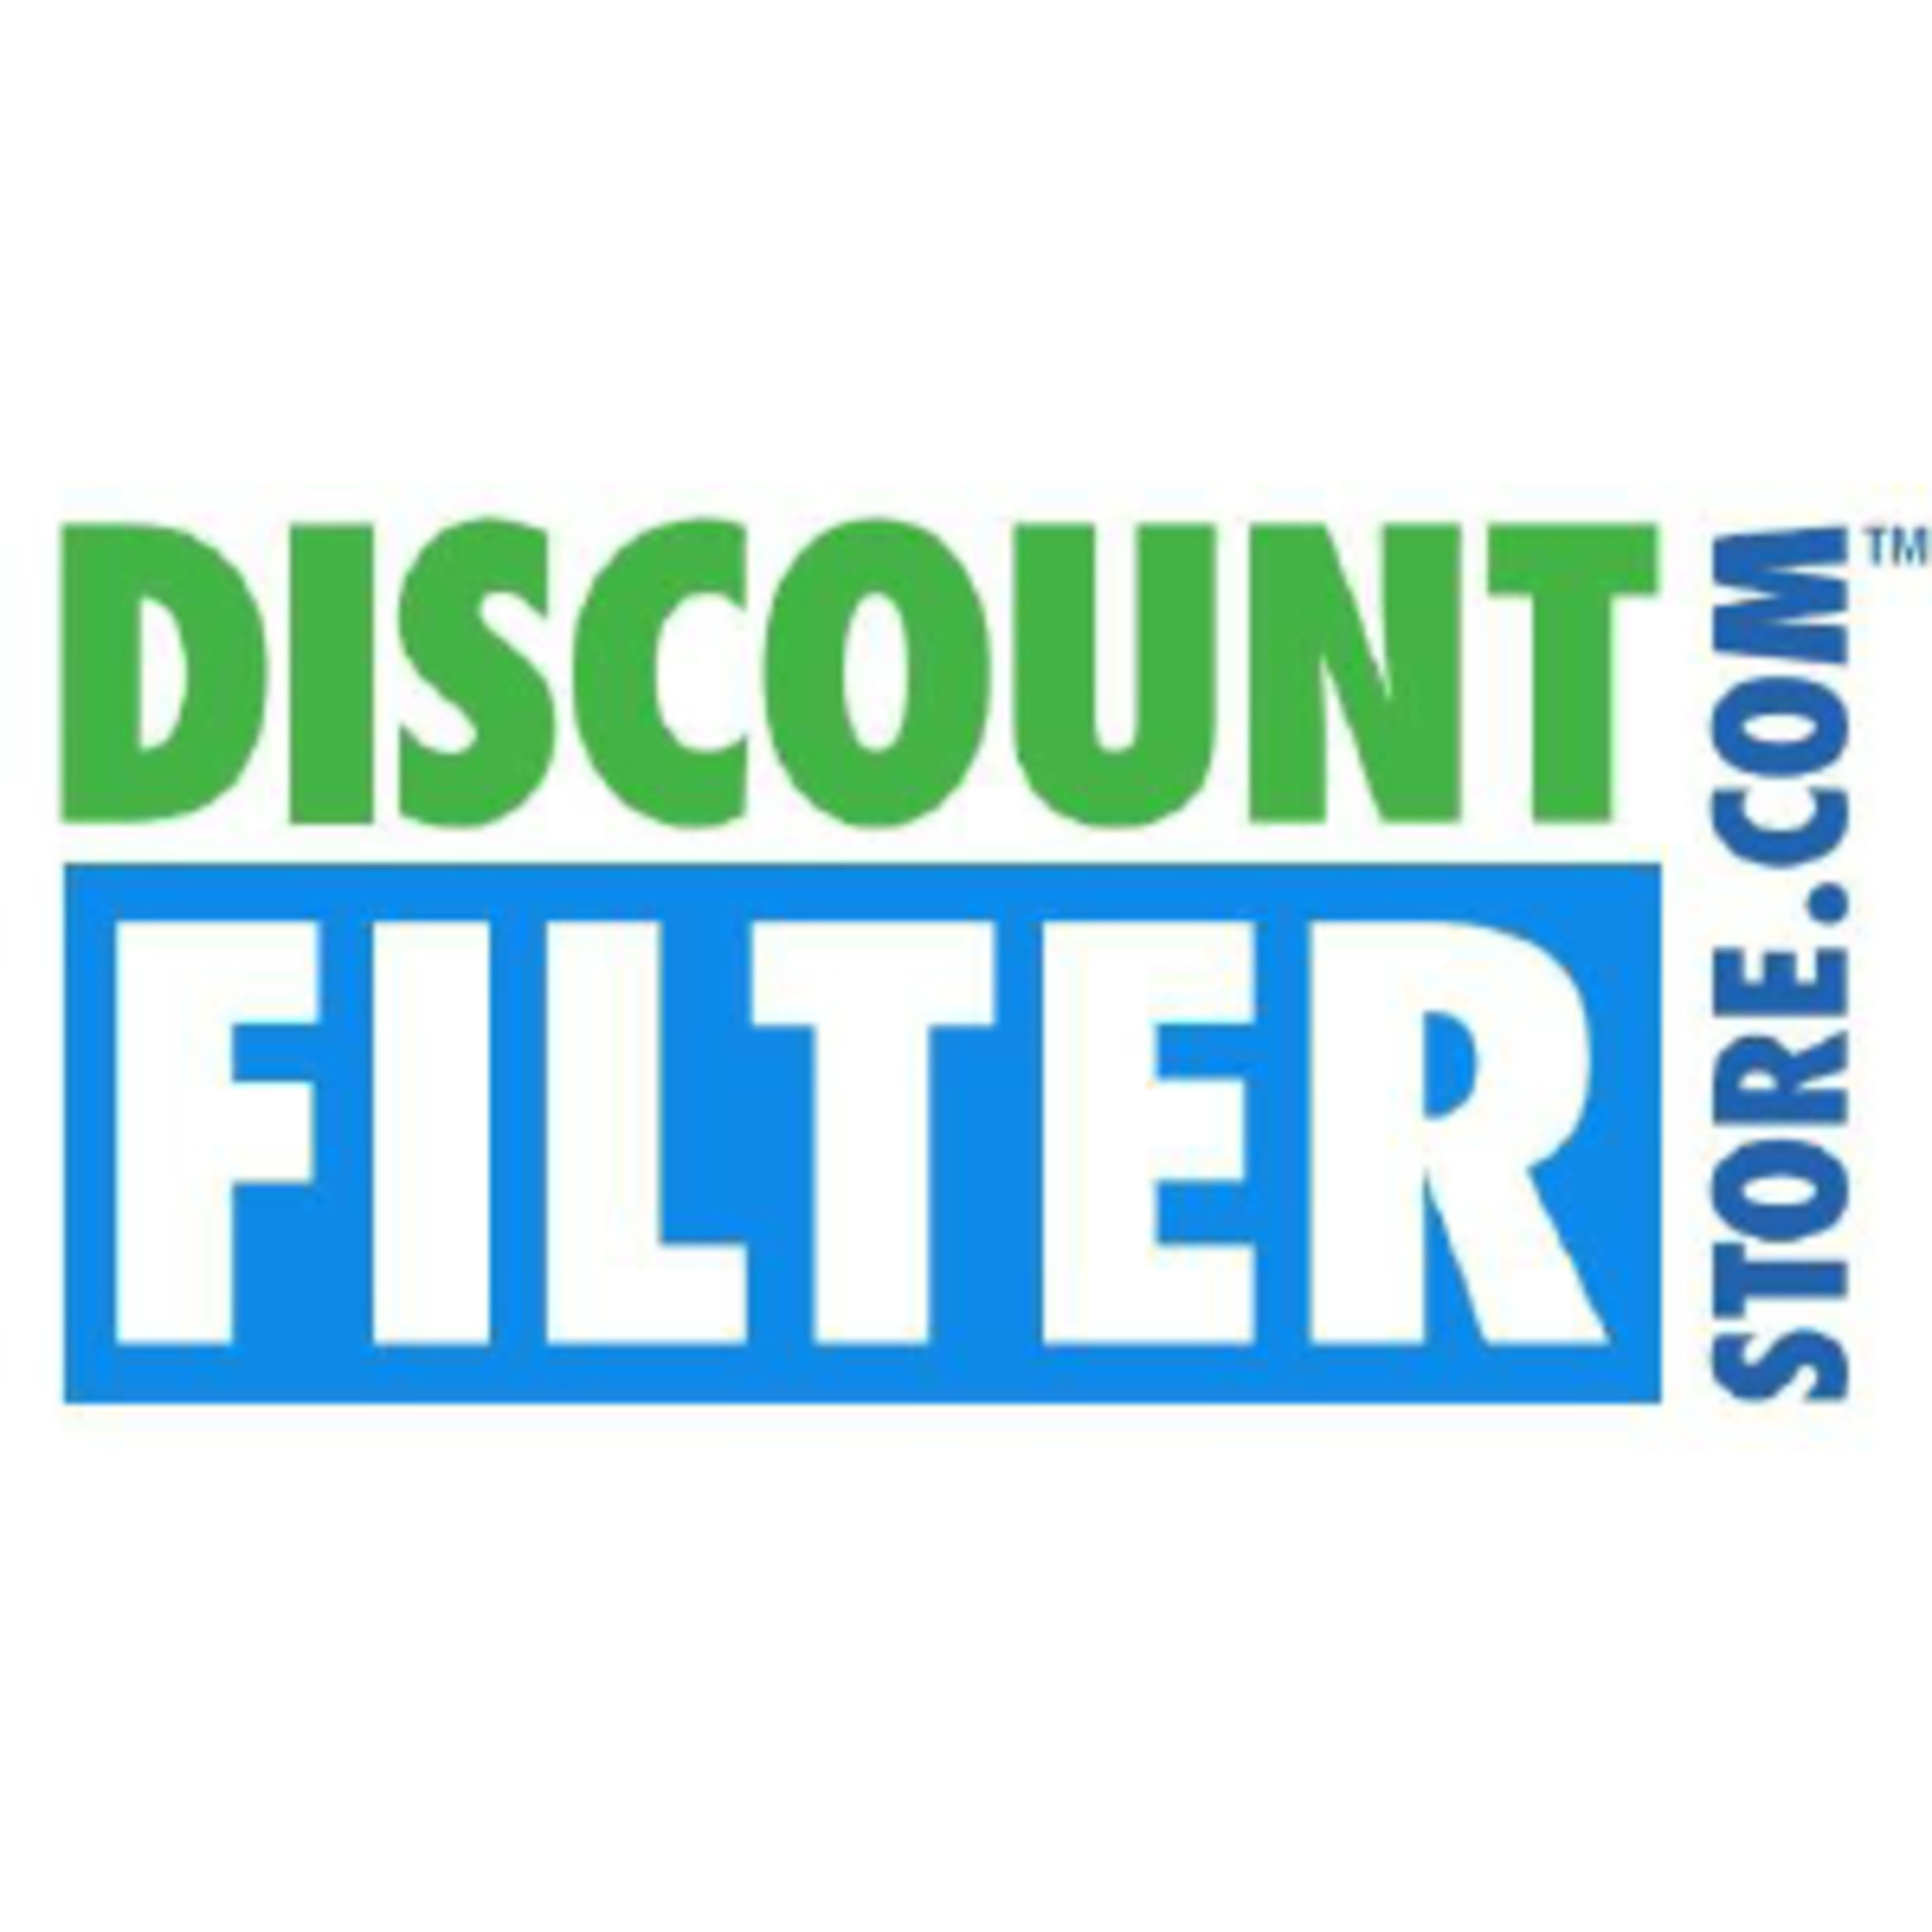 Discount Filter Store Code